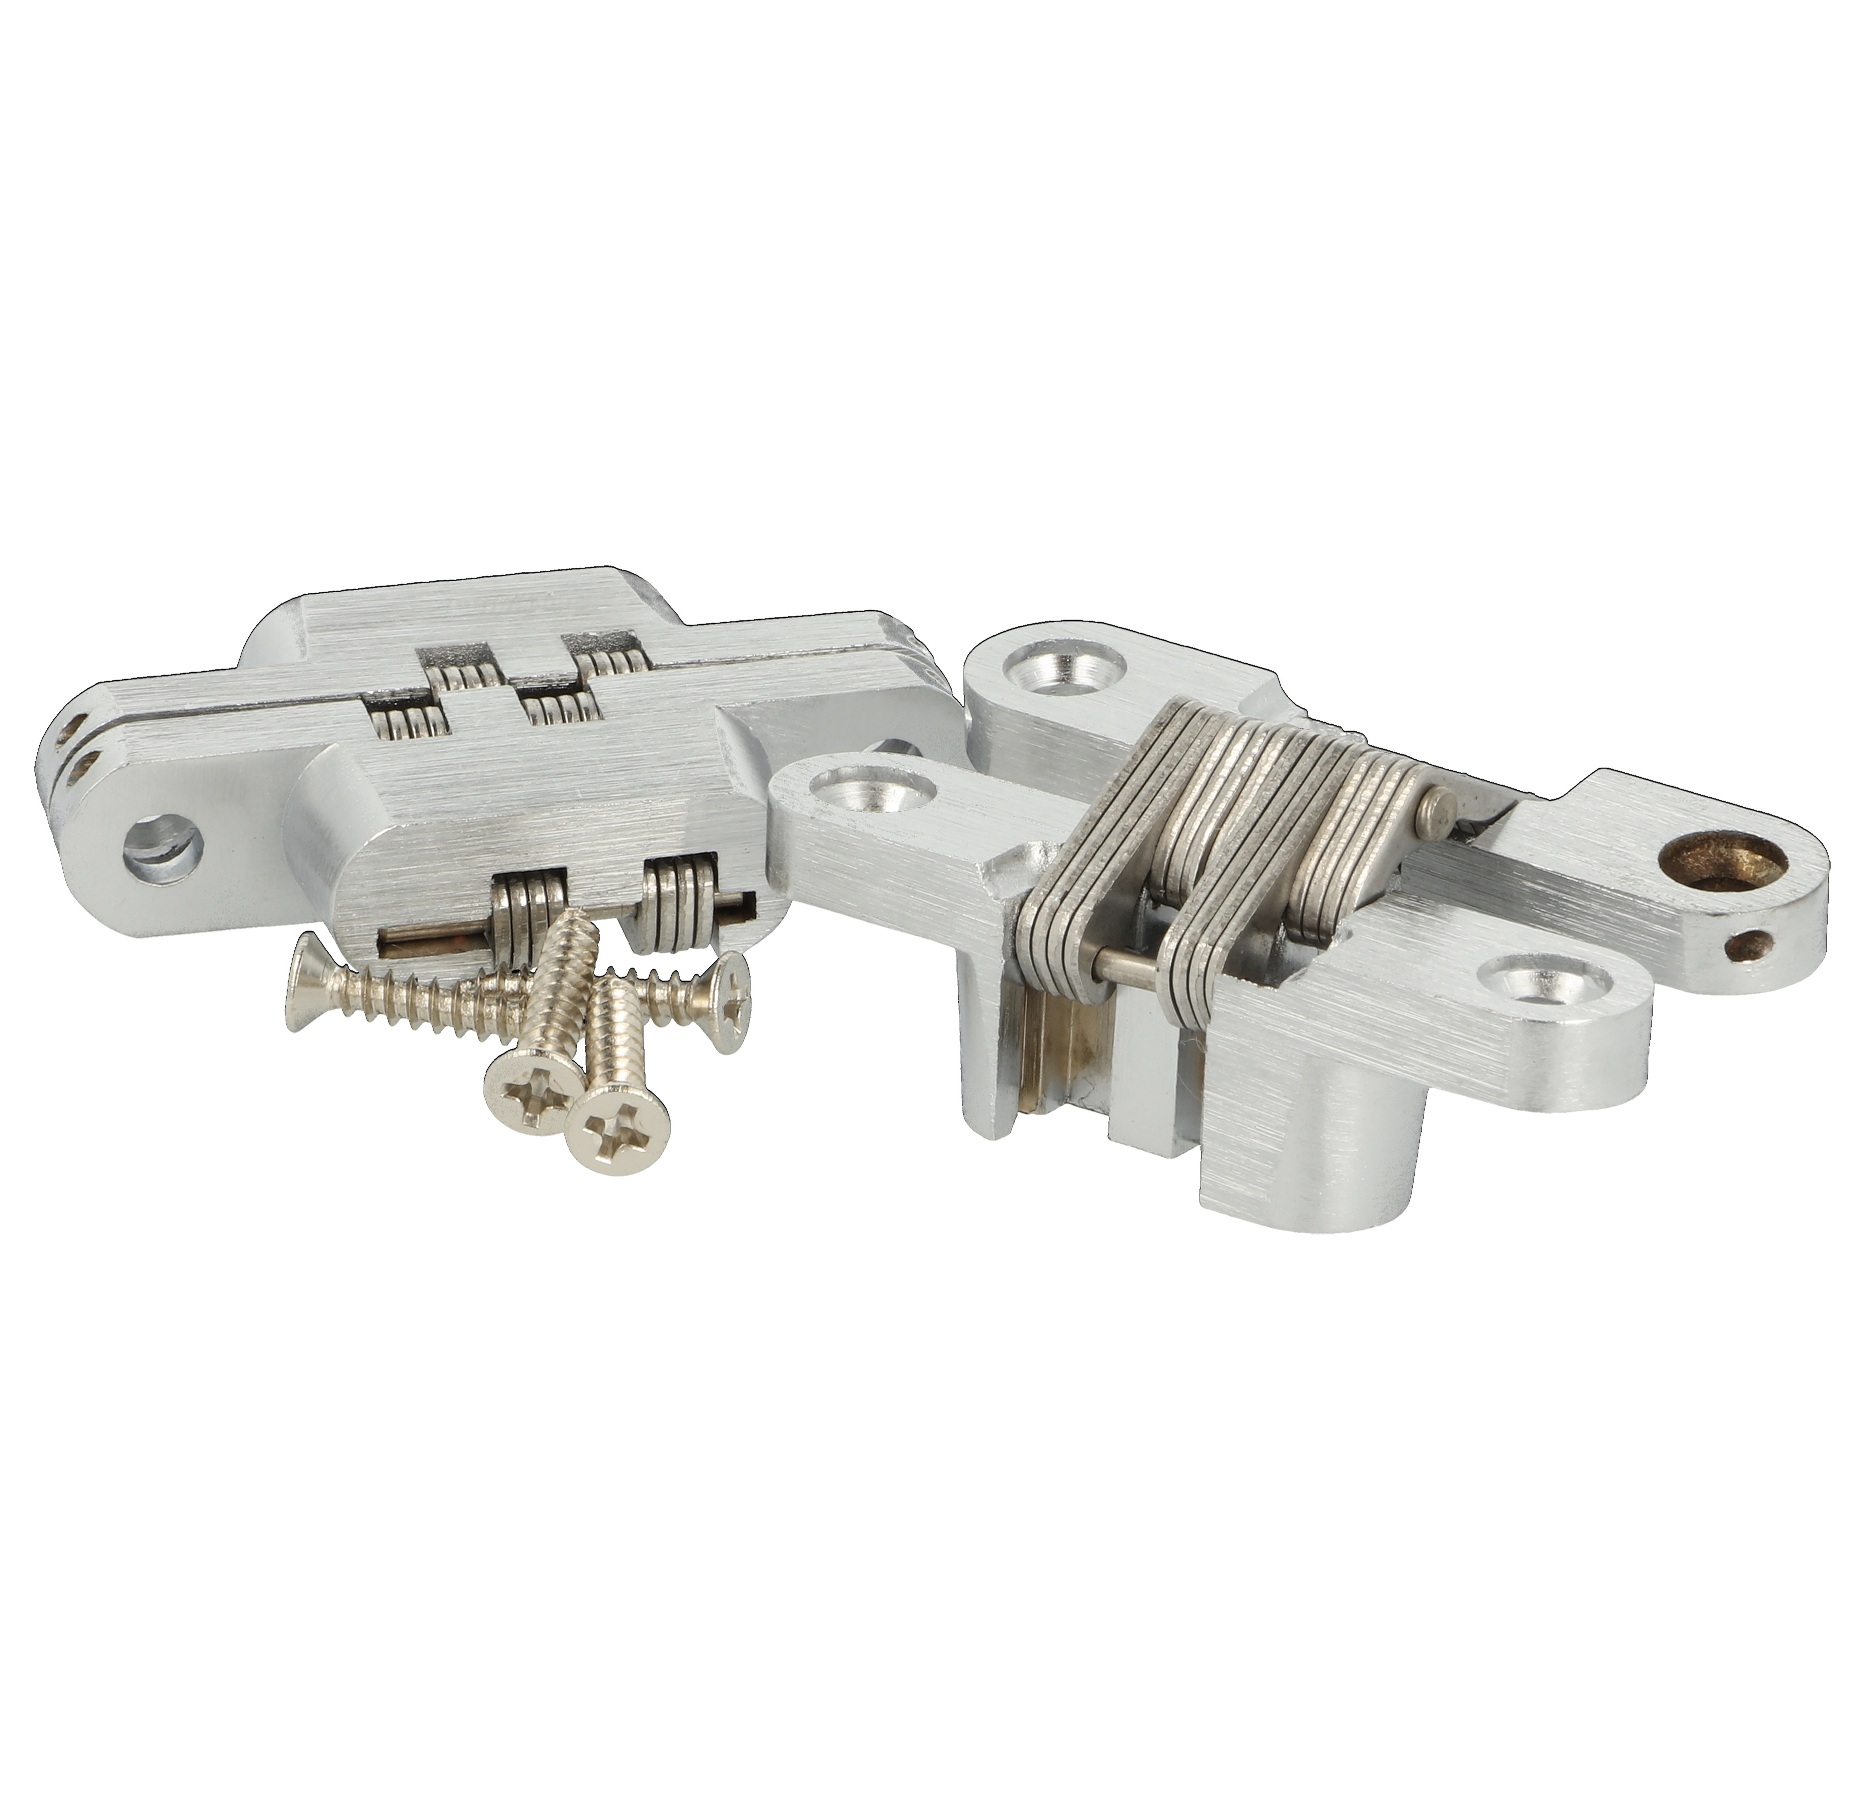 2 pieces high quality invisible cross hinges 60 x 13mm made of zamak,  stainless steel look, incl. Screws. Concealed furniture hinge from UMAXO®,  180° foldable. Hidden furniture hinge (vici hinge) to let in